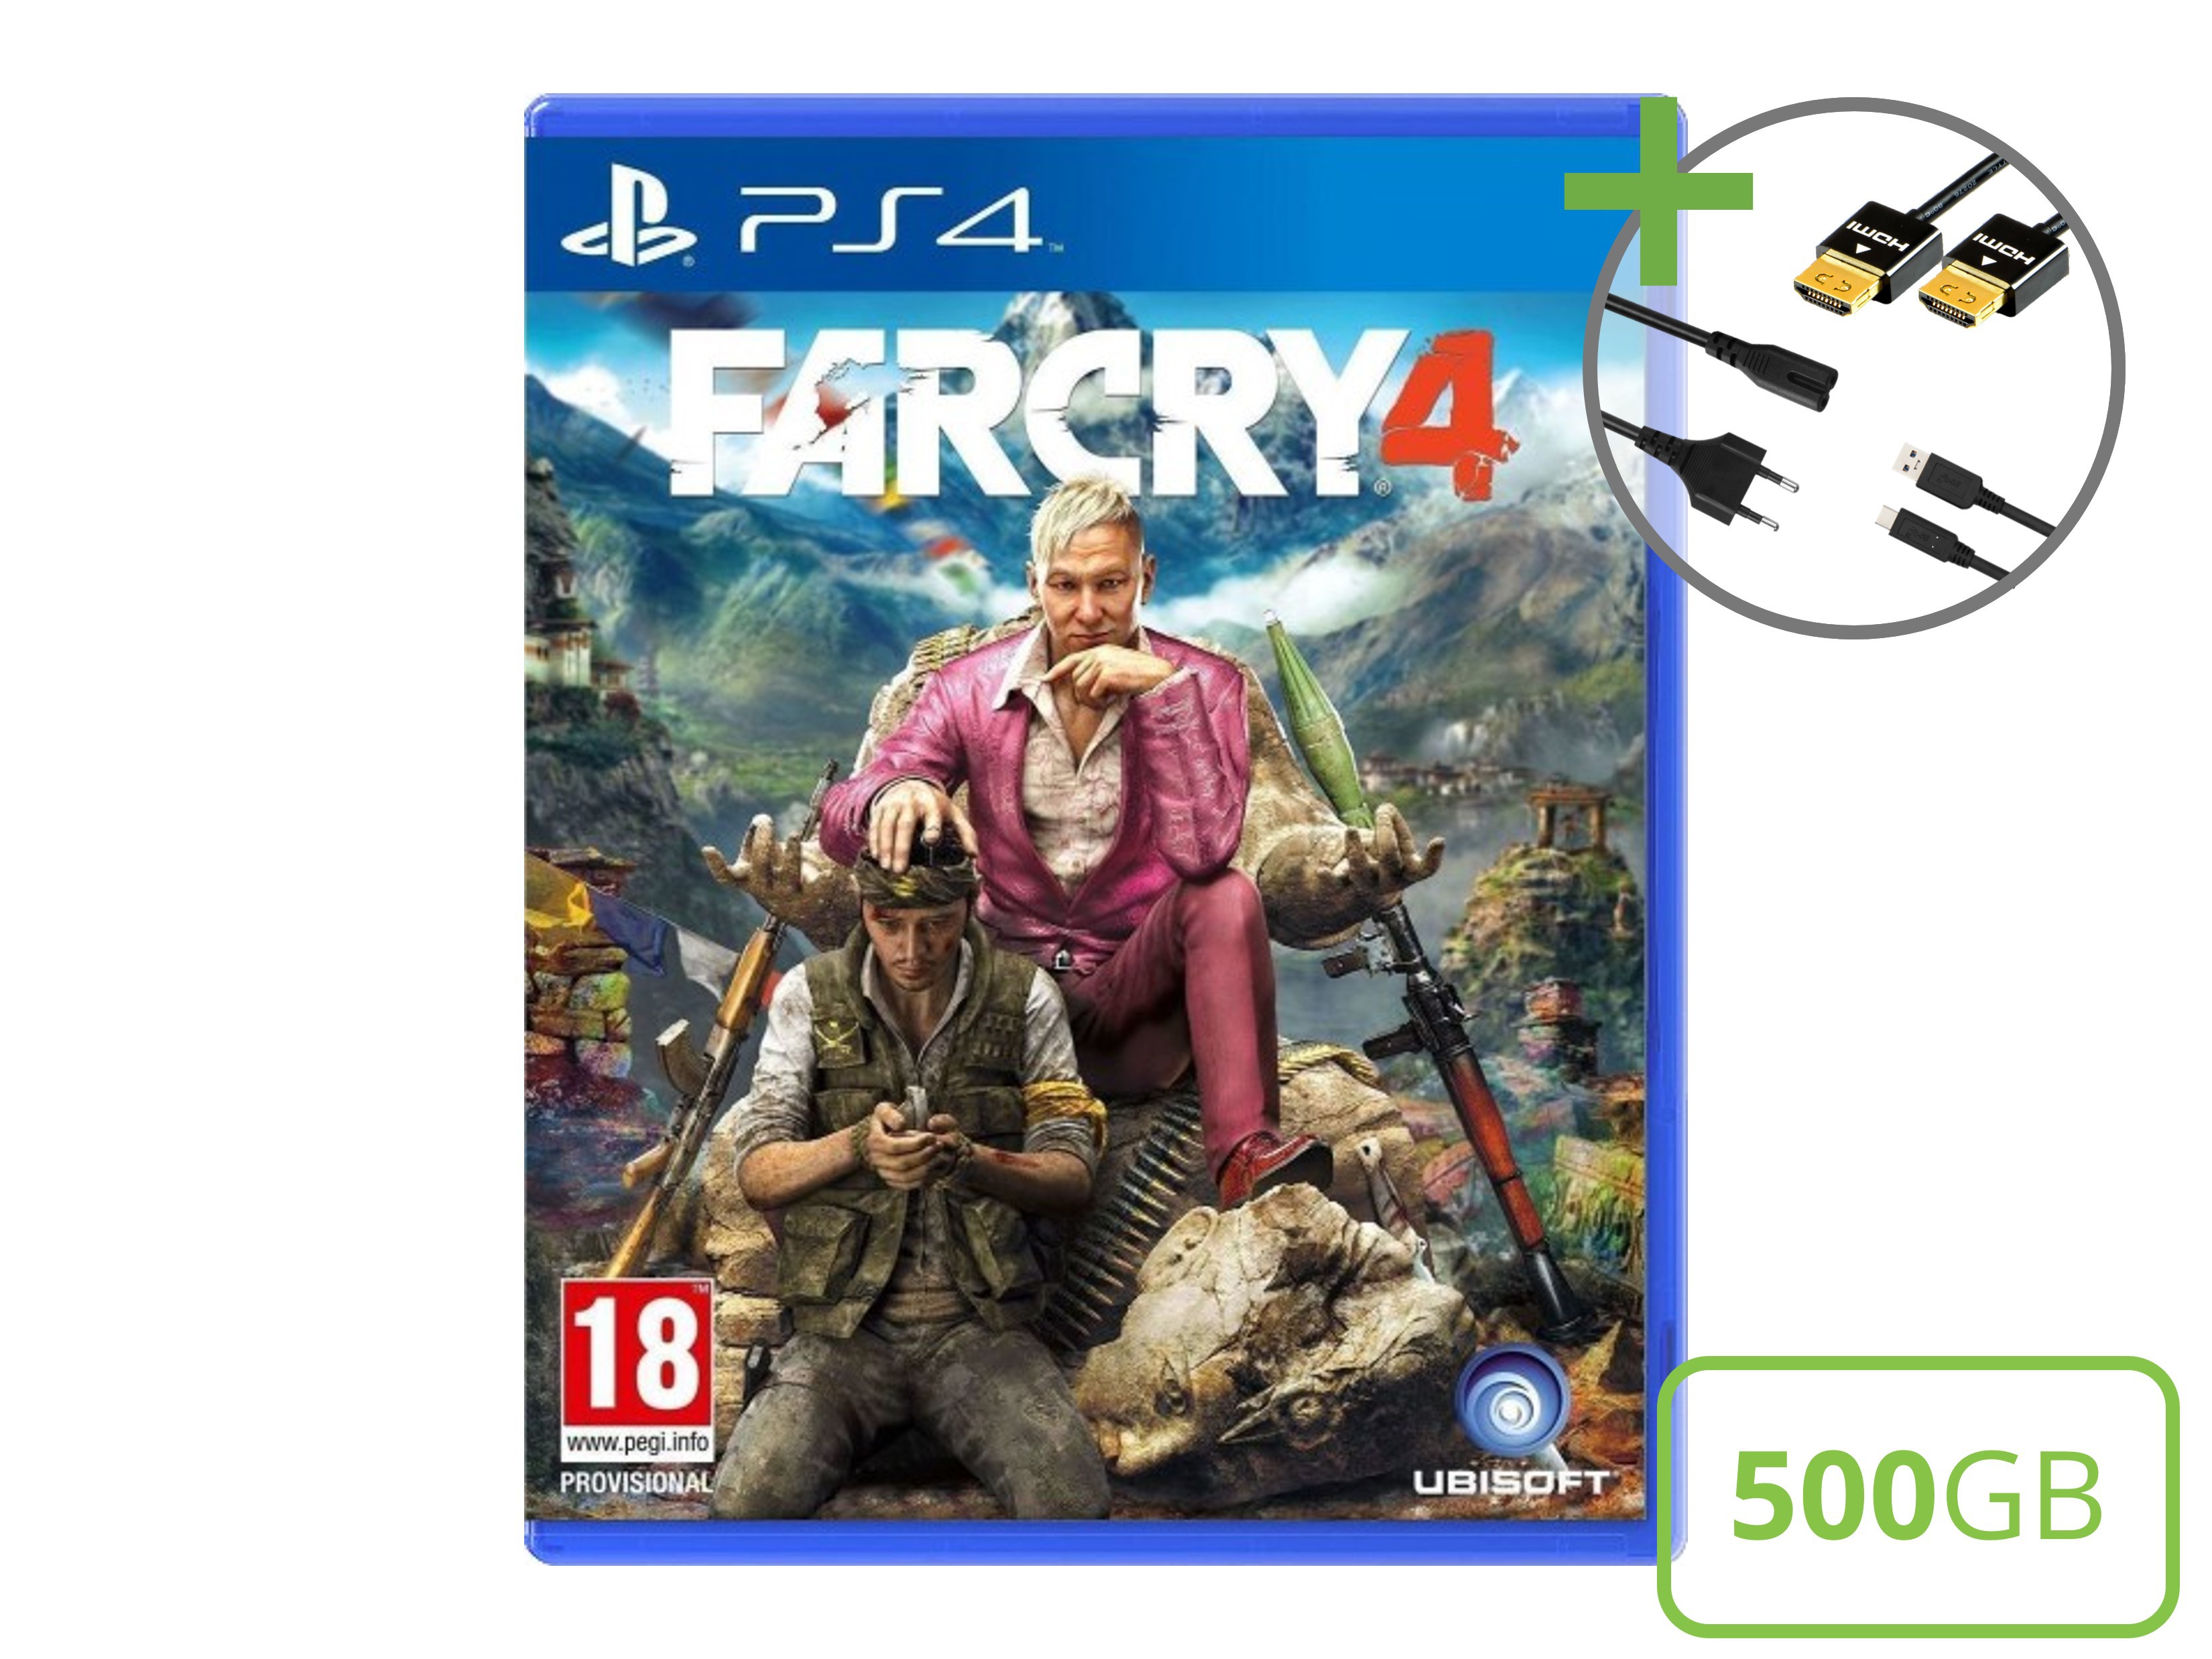 Sony PlayStation 4 Starter Pack - 500GB Far Cry 4 Edition - Playstation 4 Hardware - 5